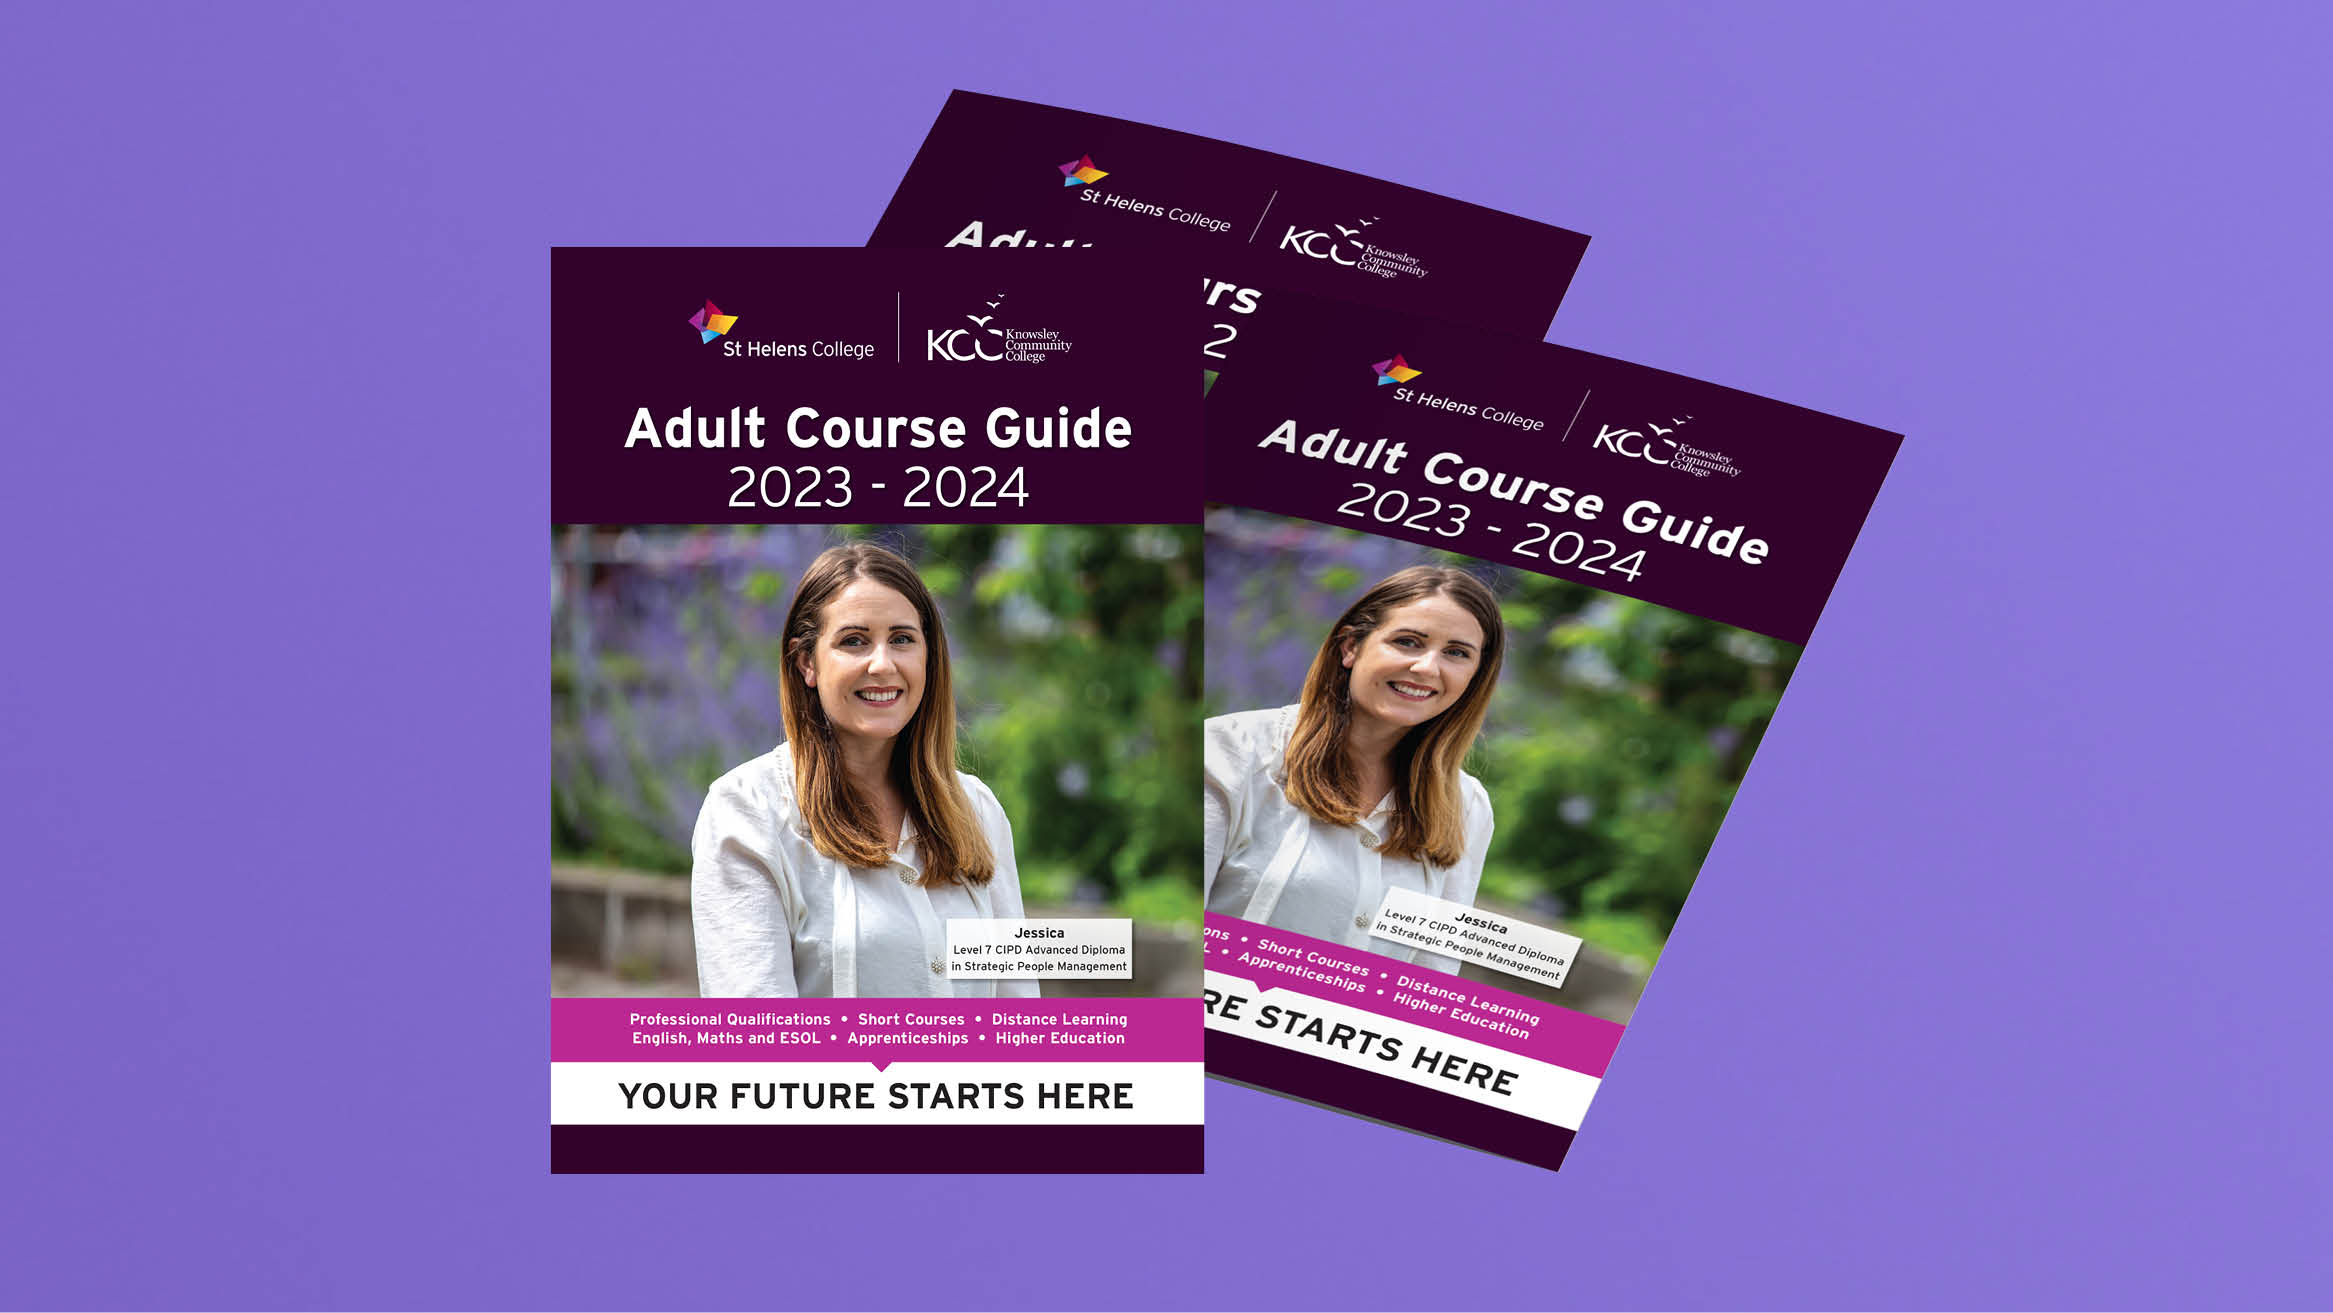 Image of Summer 2023 Adult Course Guide